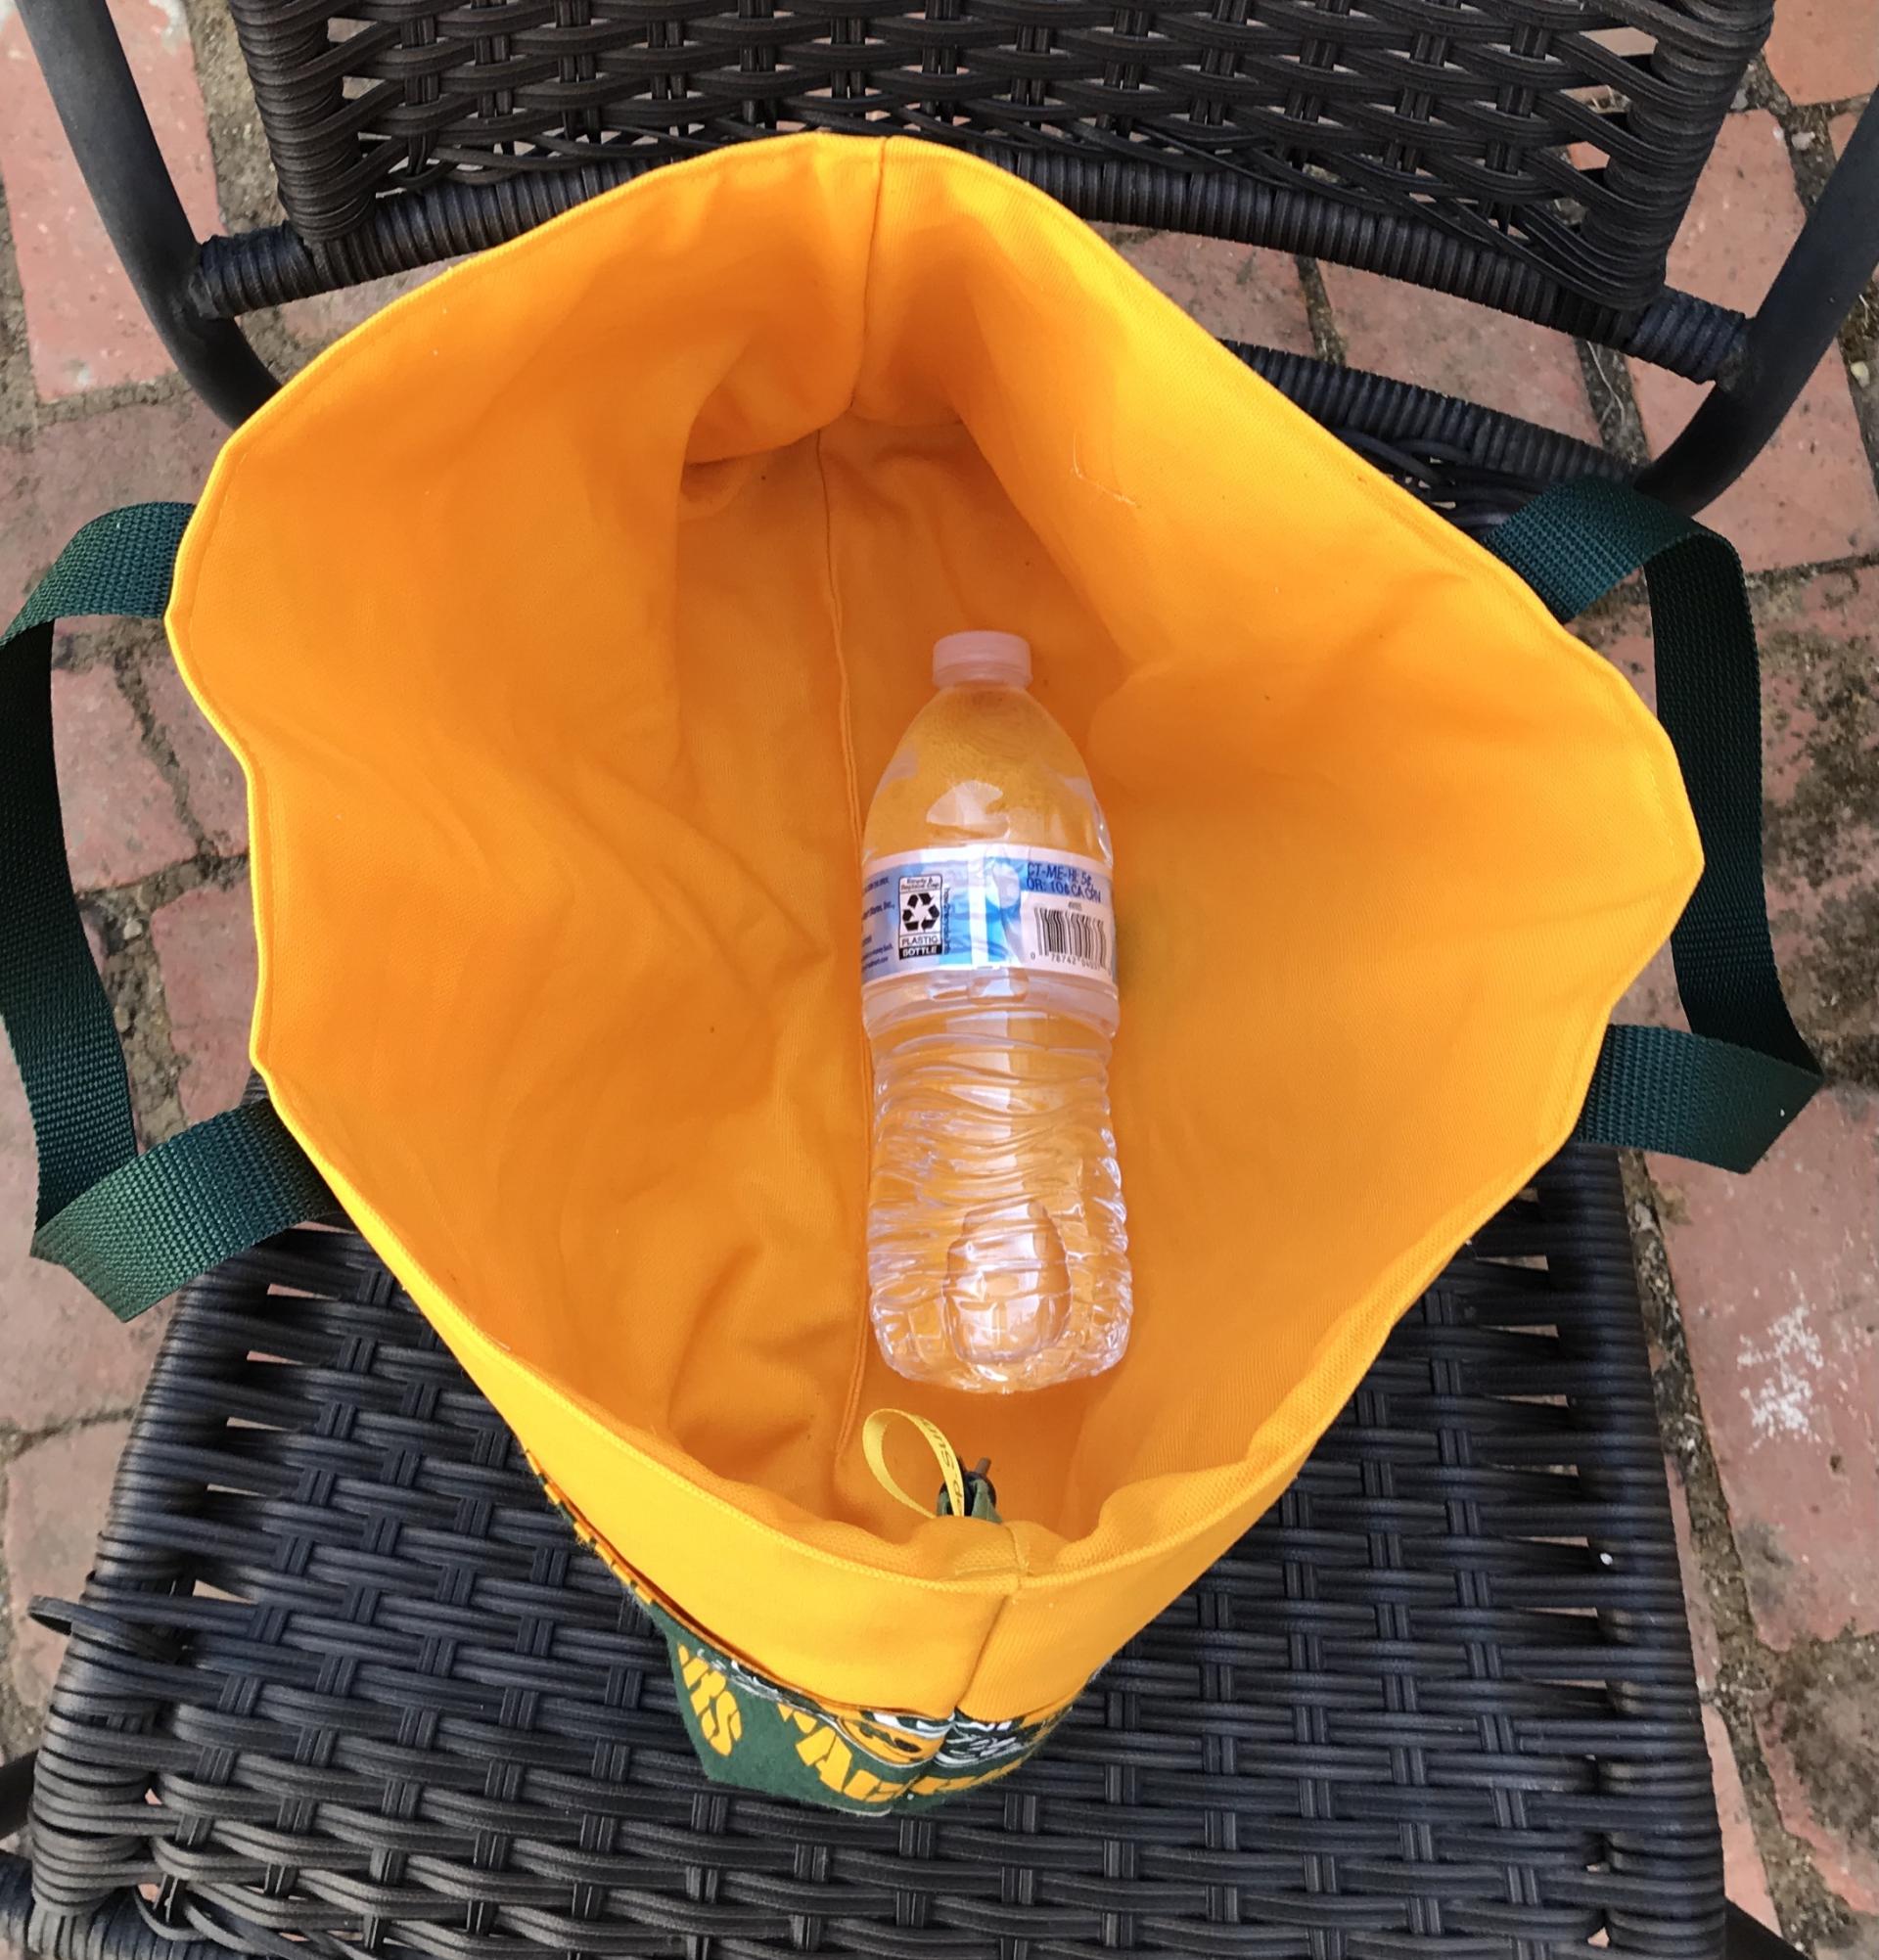 Example of similar bag with a water bottle to show scale